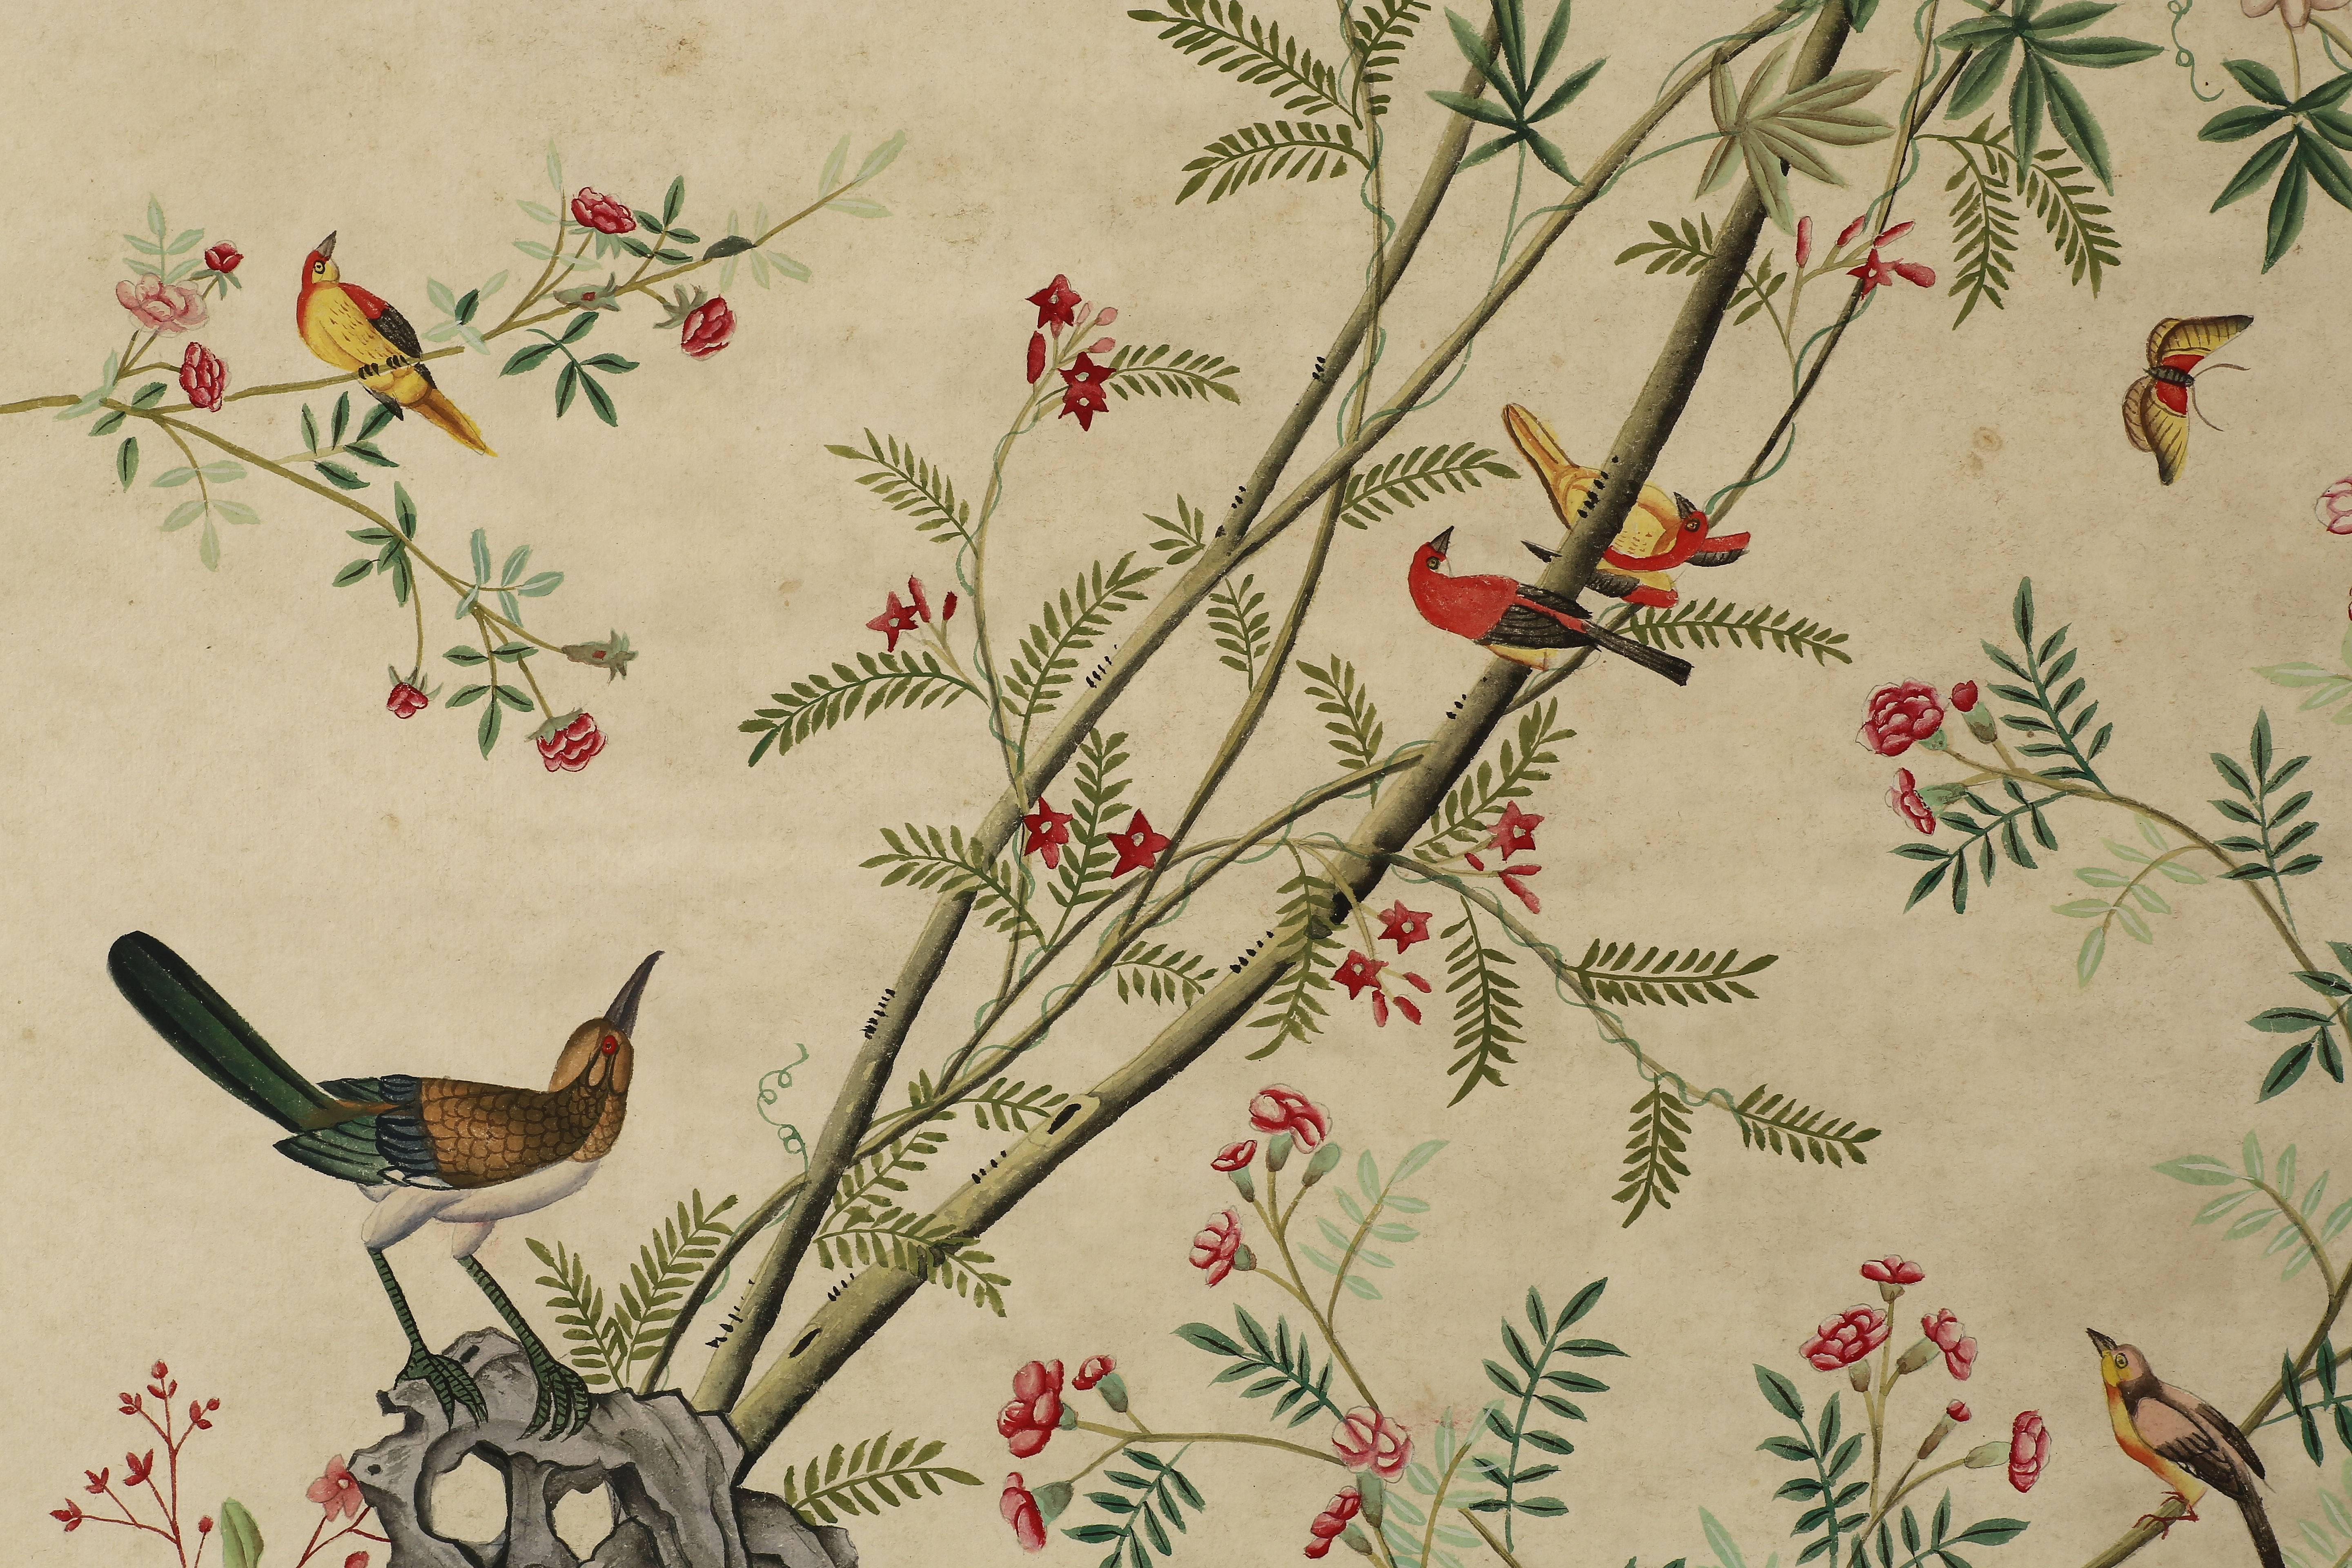 Contemporary Pair of Chinoiserie Hand-Painted Wall Paper Panels, Watercolor on Rice Paper